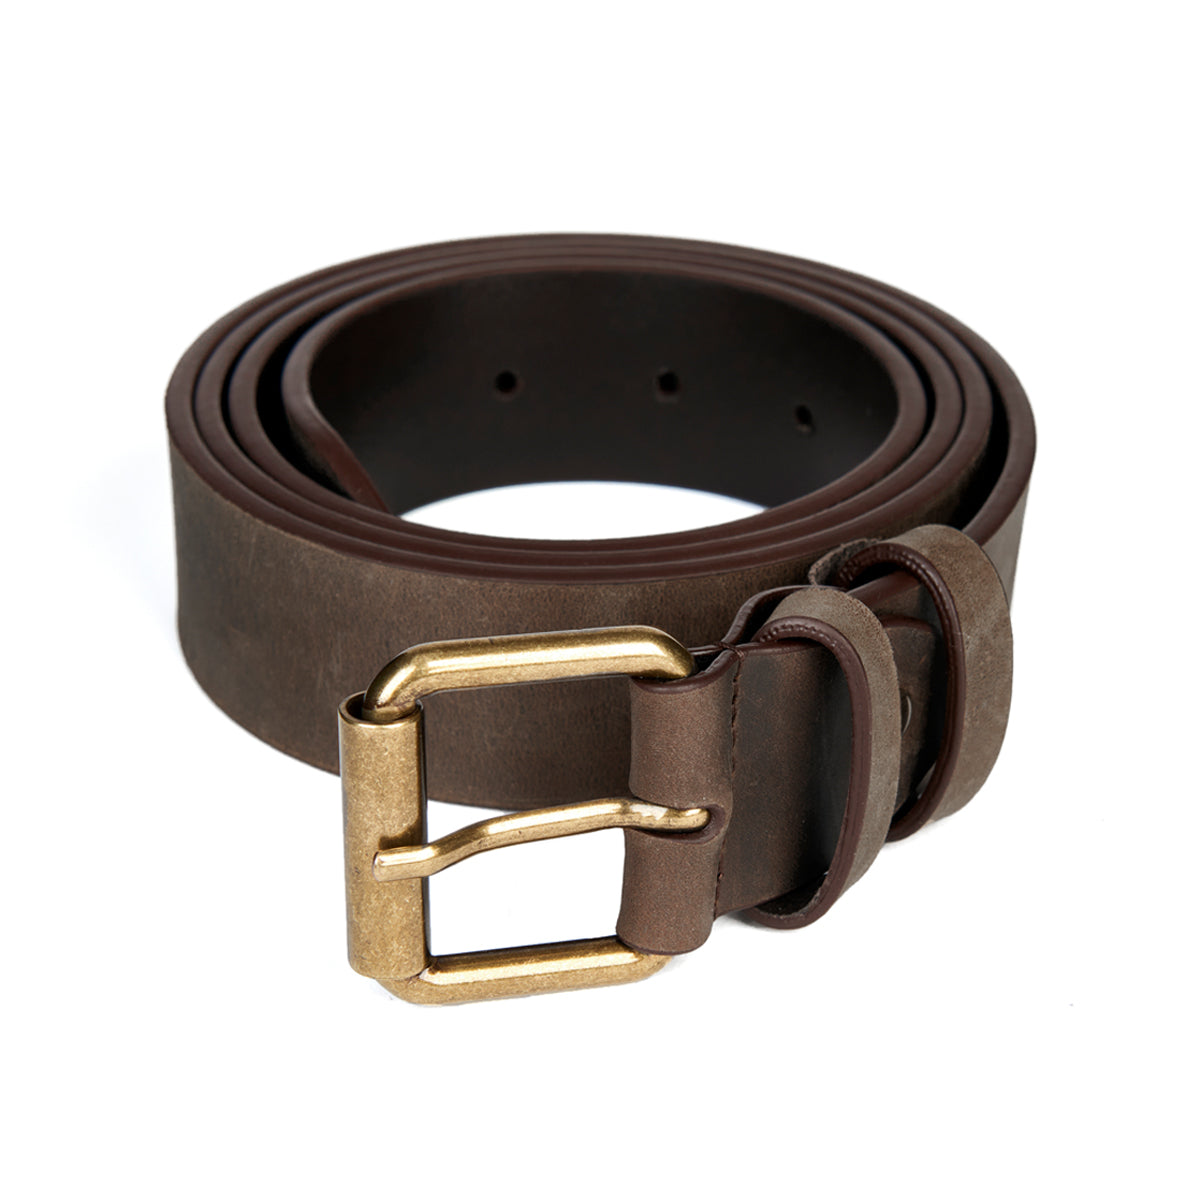 NPS Solovair | Accessories | Leather Goods | Leather Belt – NPS Solovair US